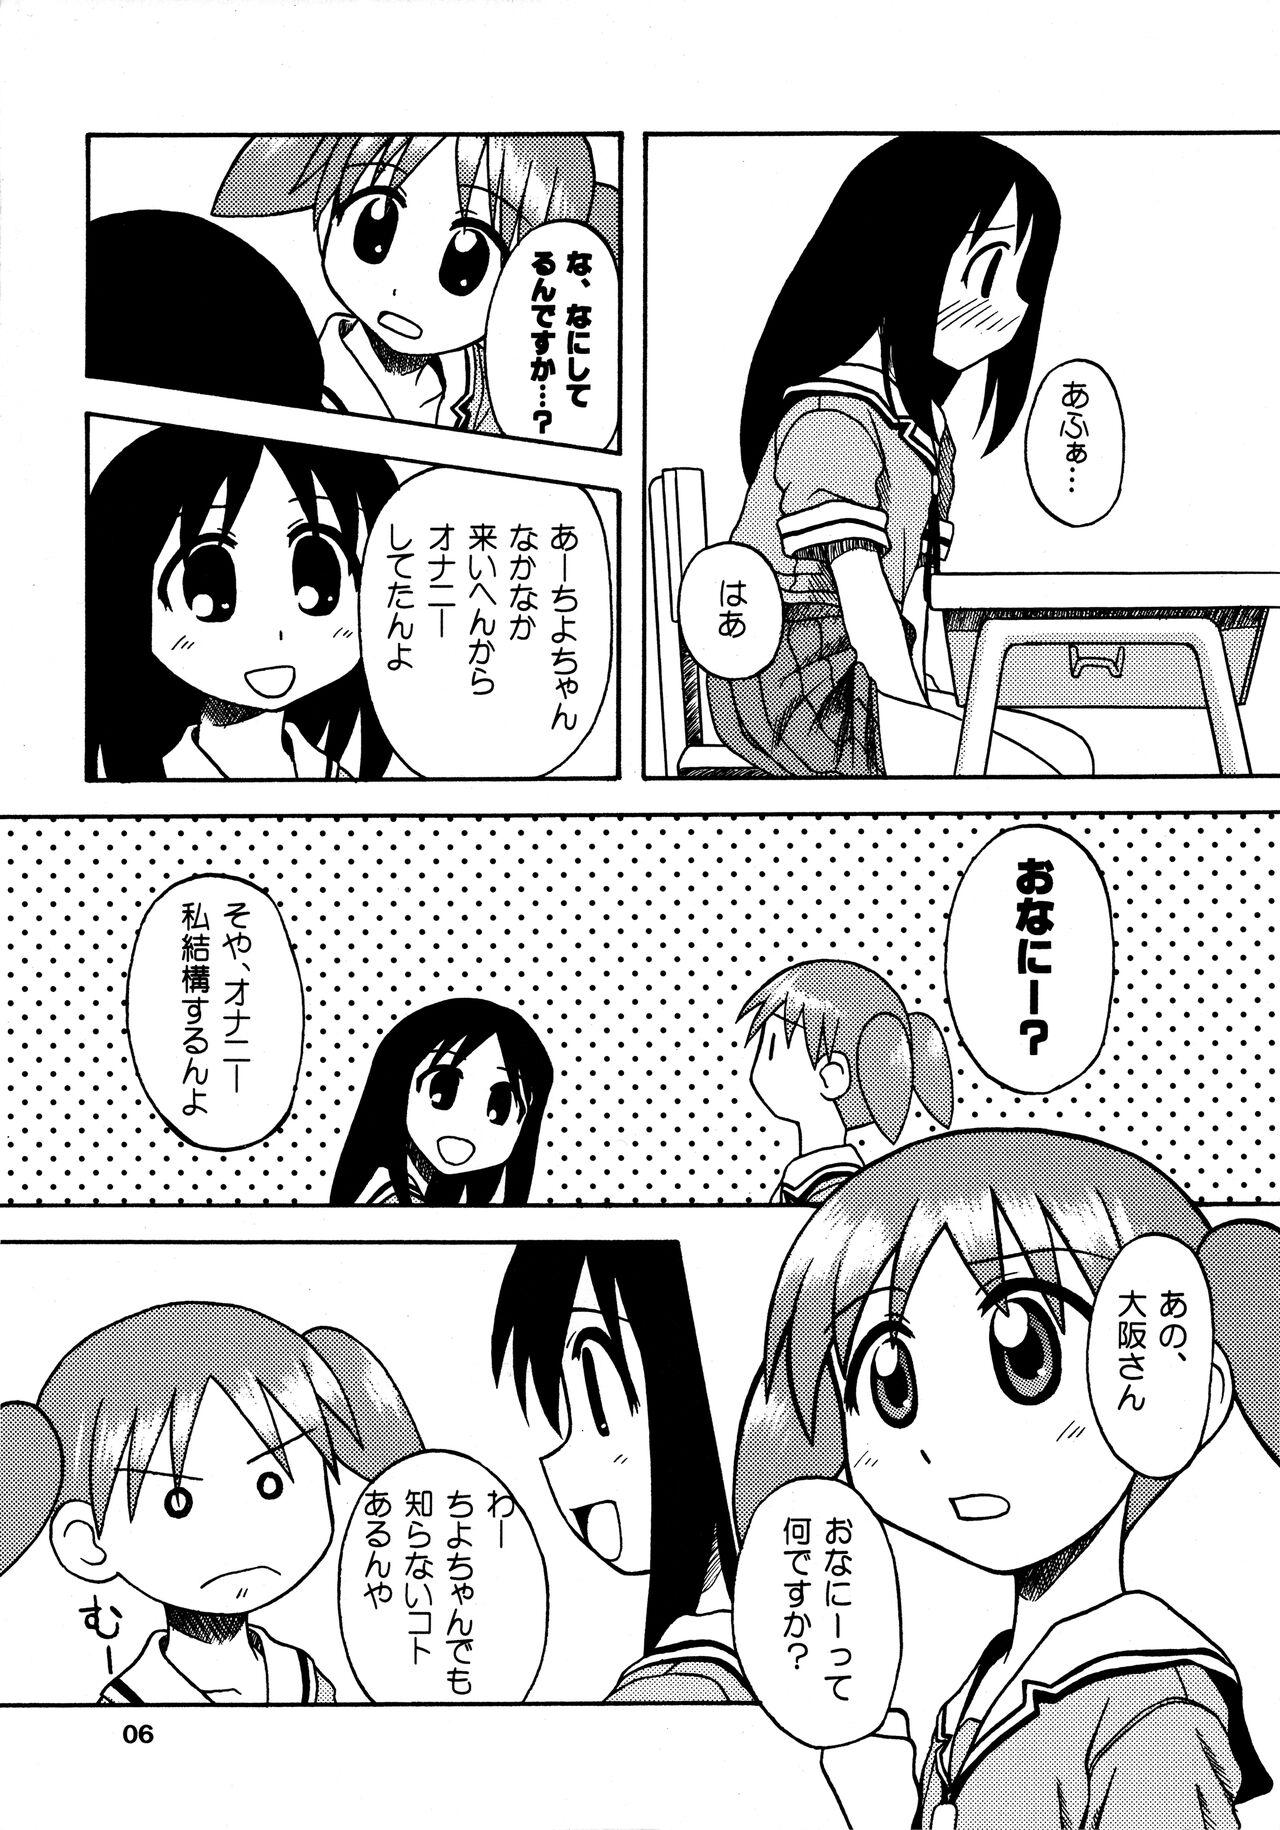 Black Hair ANOTHER LIFE - Azumanga daioh Celebrity Nudes - Page 6